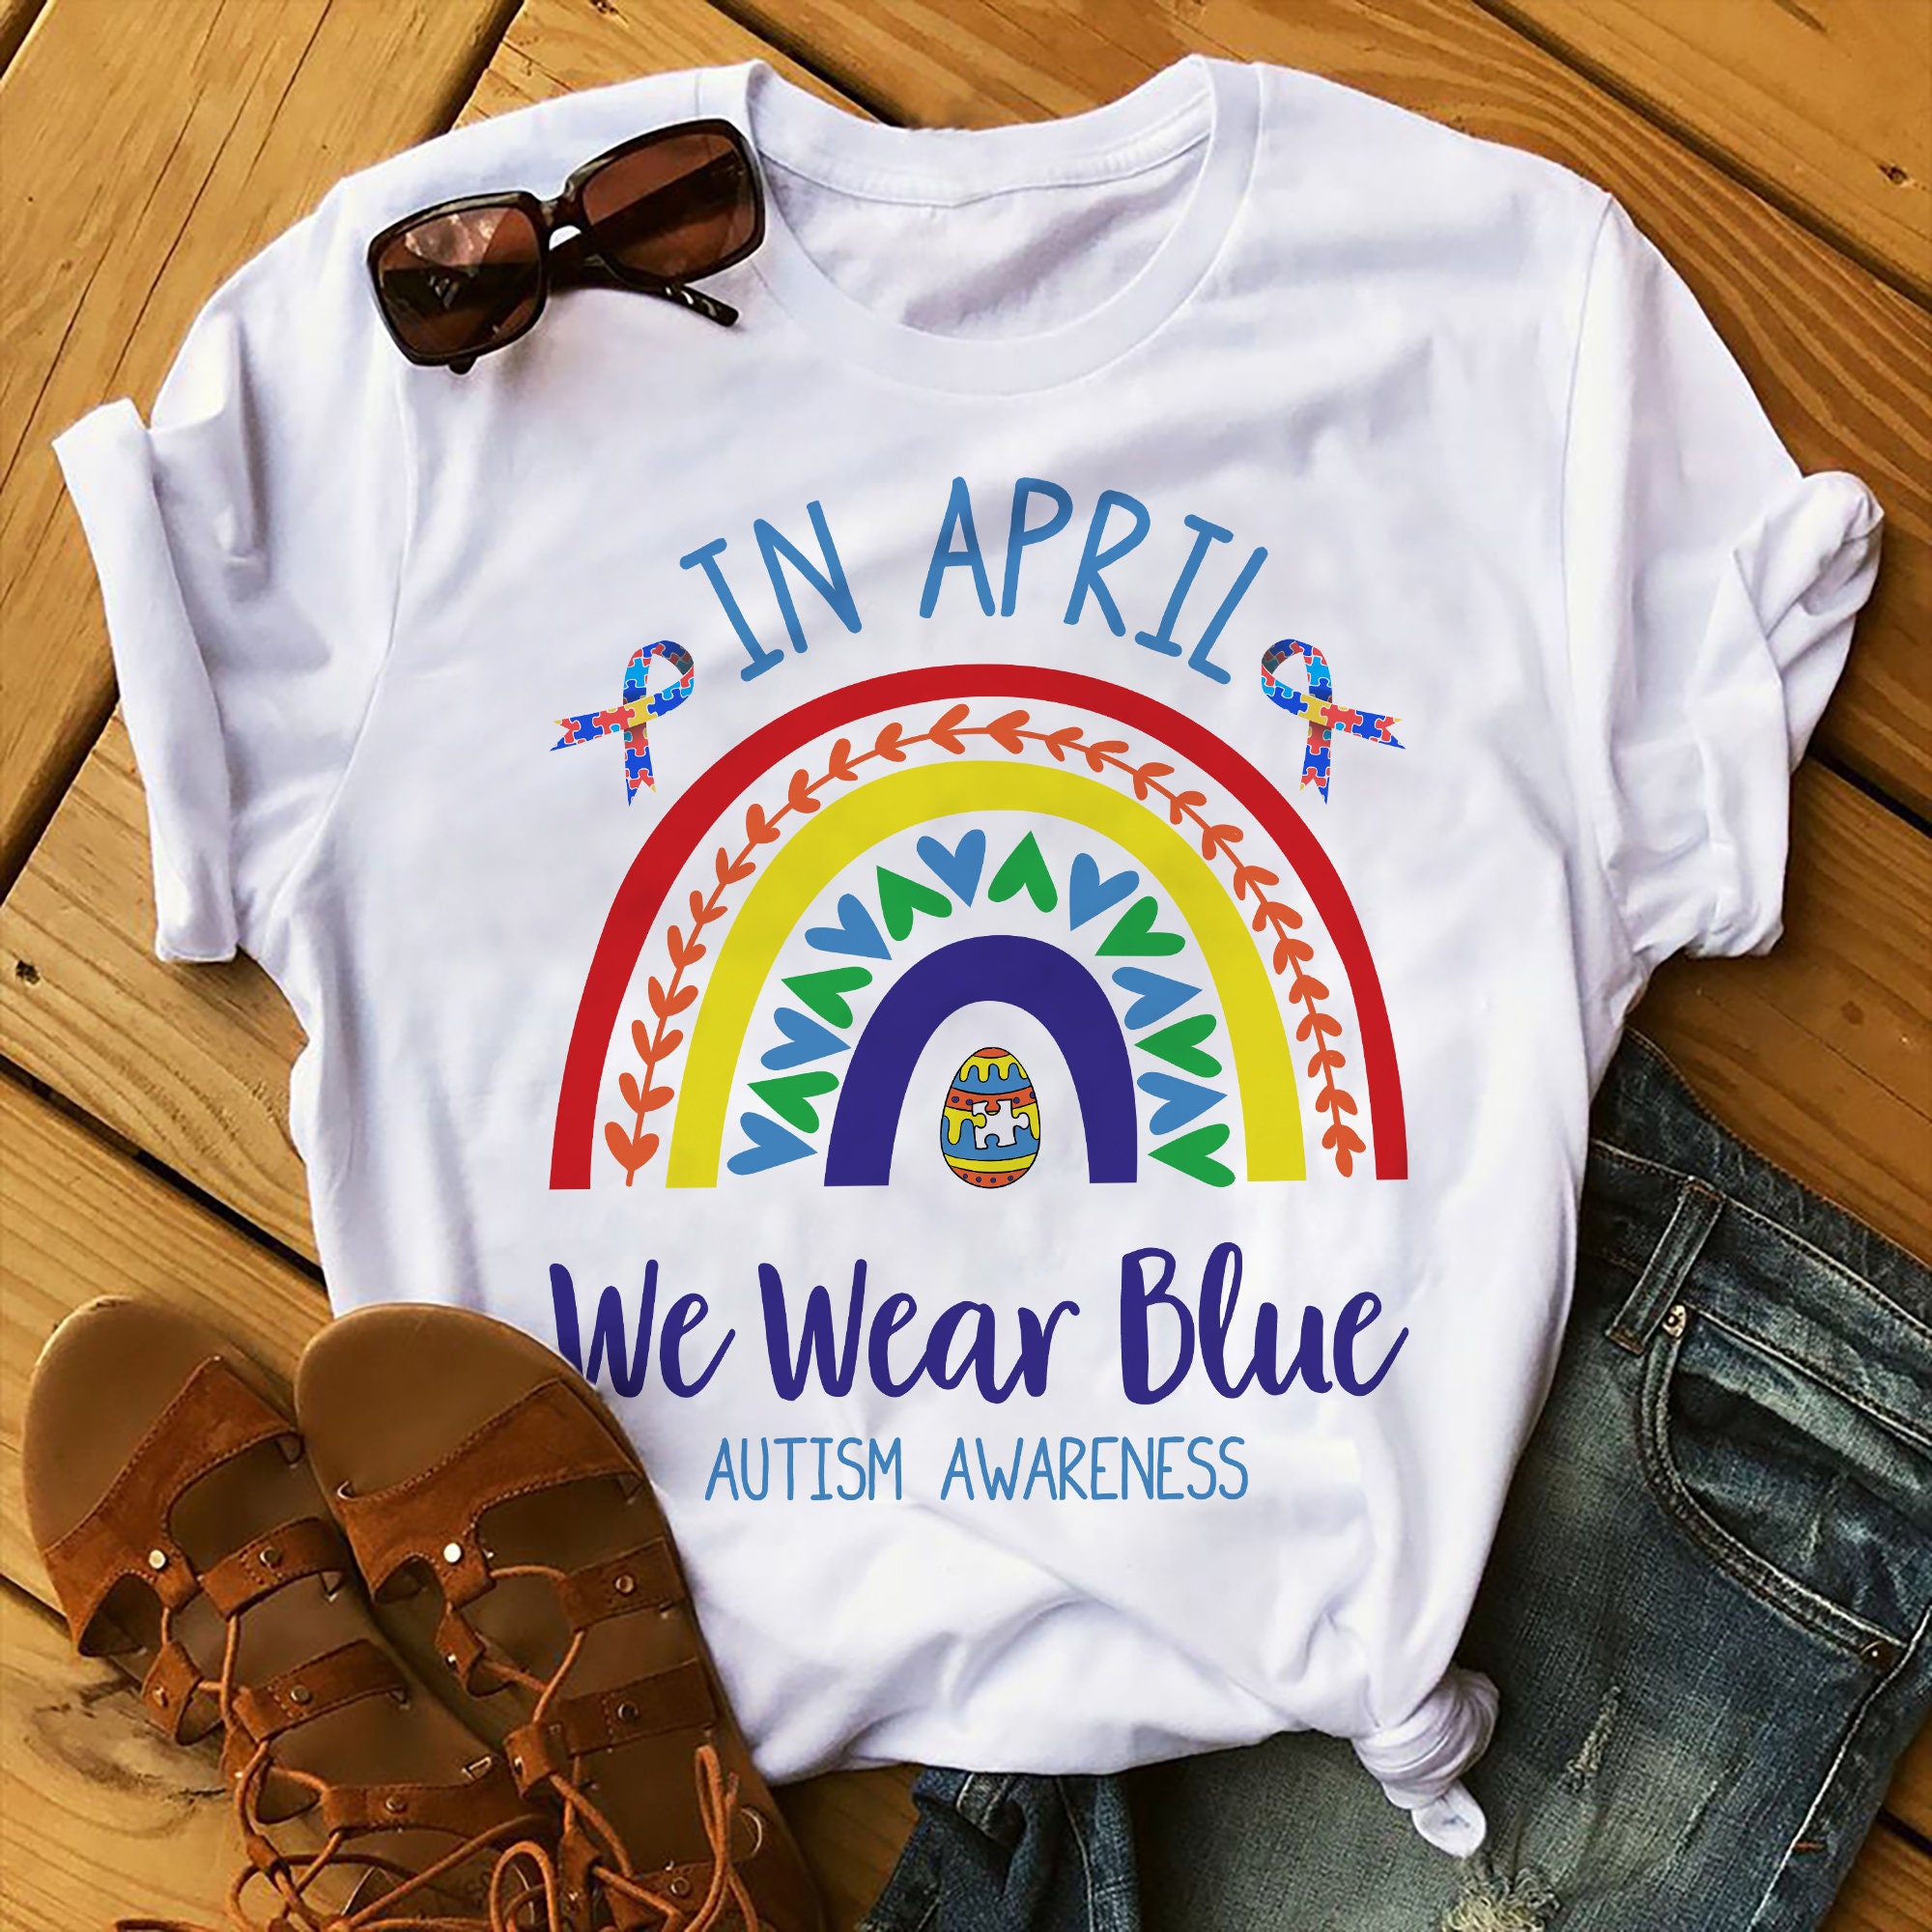 In April We Wear Blue ShirtAutism Awareness Rainbow | Etsy